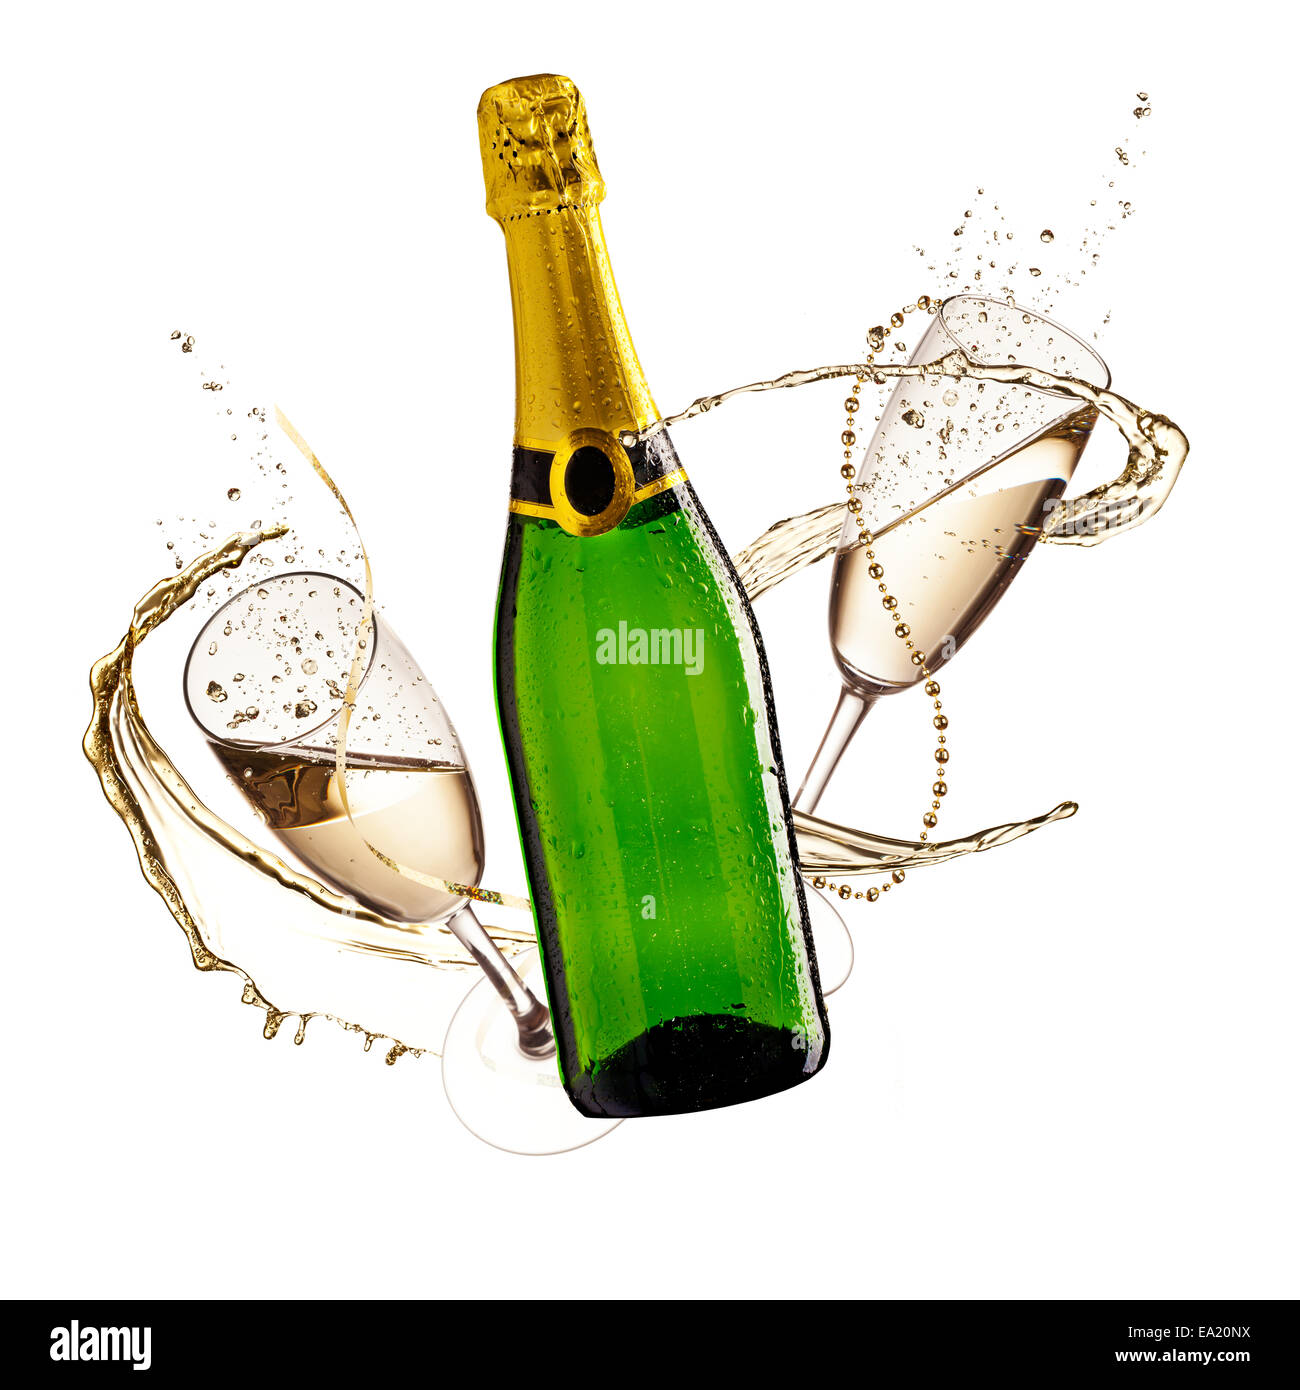 https://c8.alamy.com/comp/EA20NX/two-glasses-of-champagne-and-bottle-with-splash-isolated-on-white-EA20NX.jpg